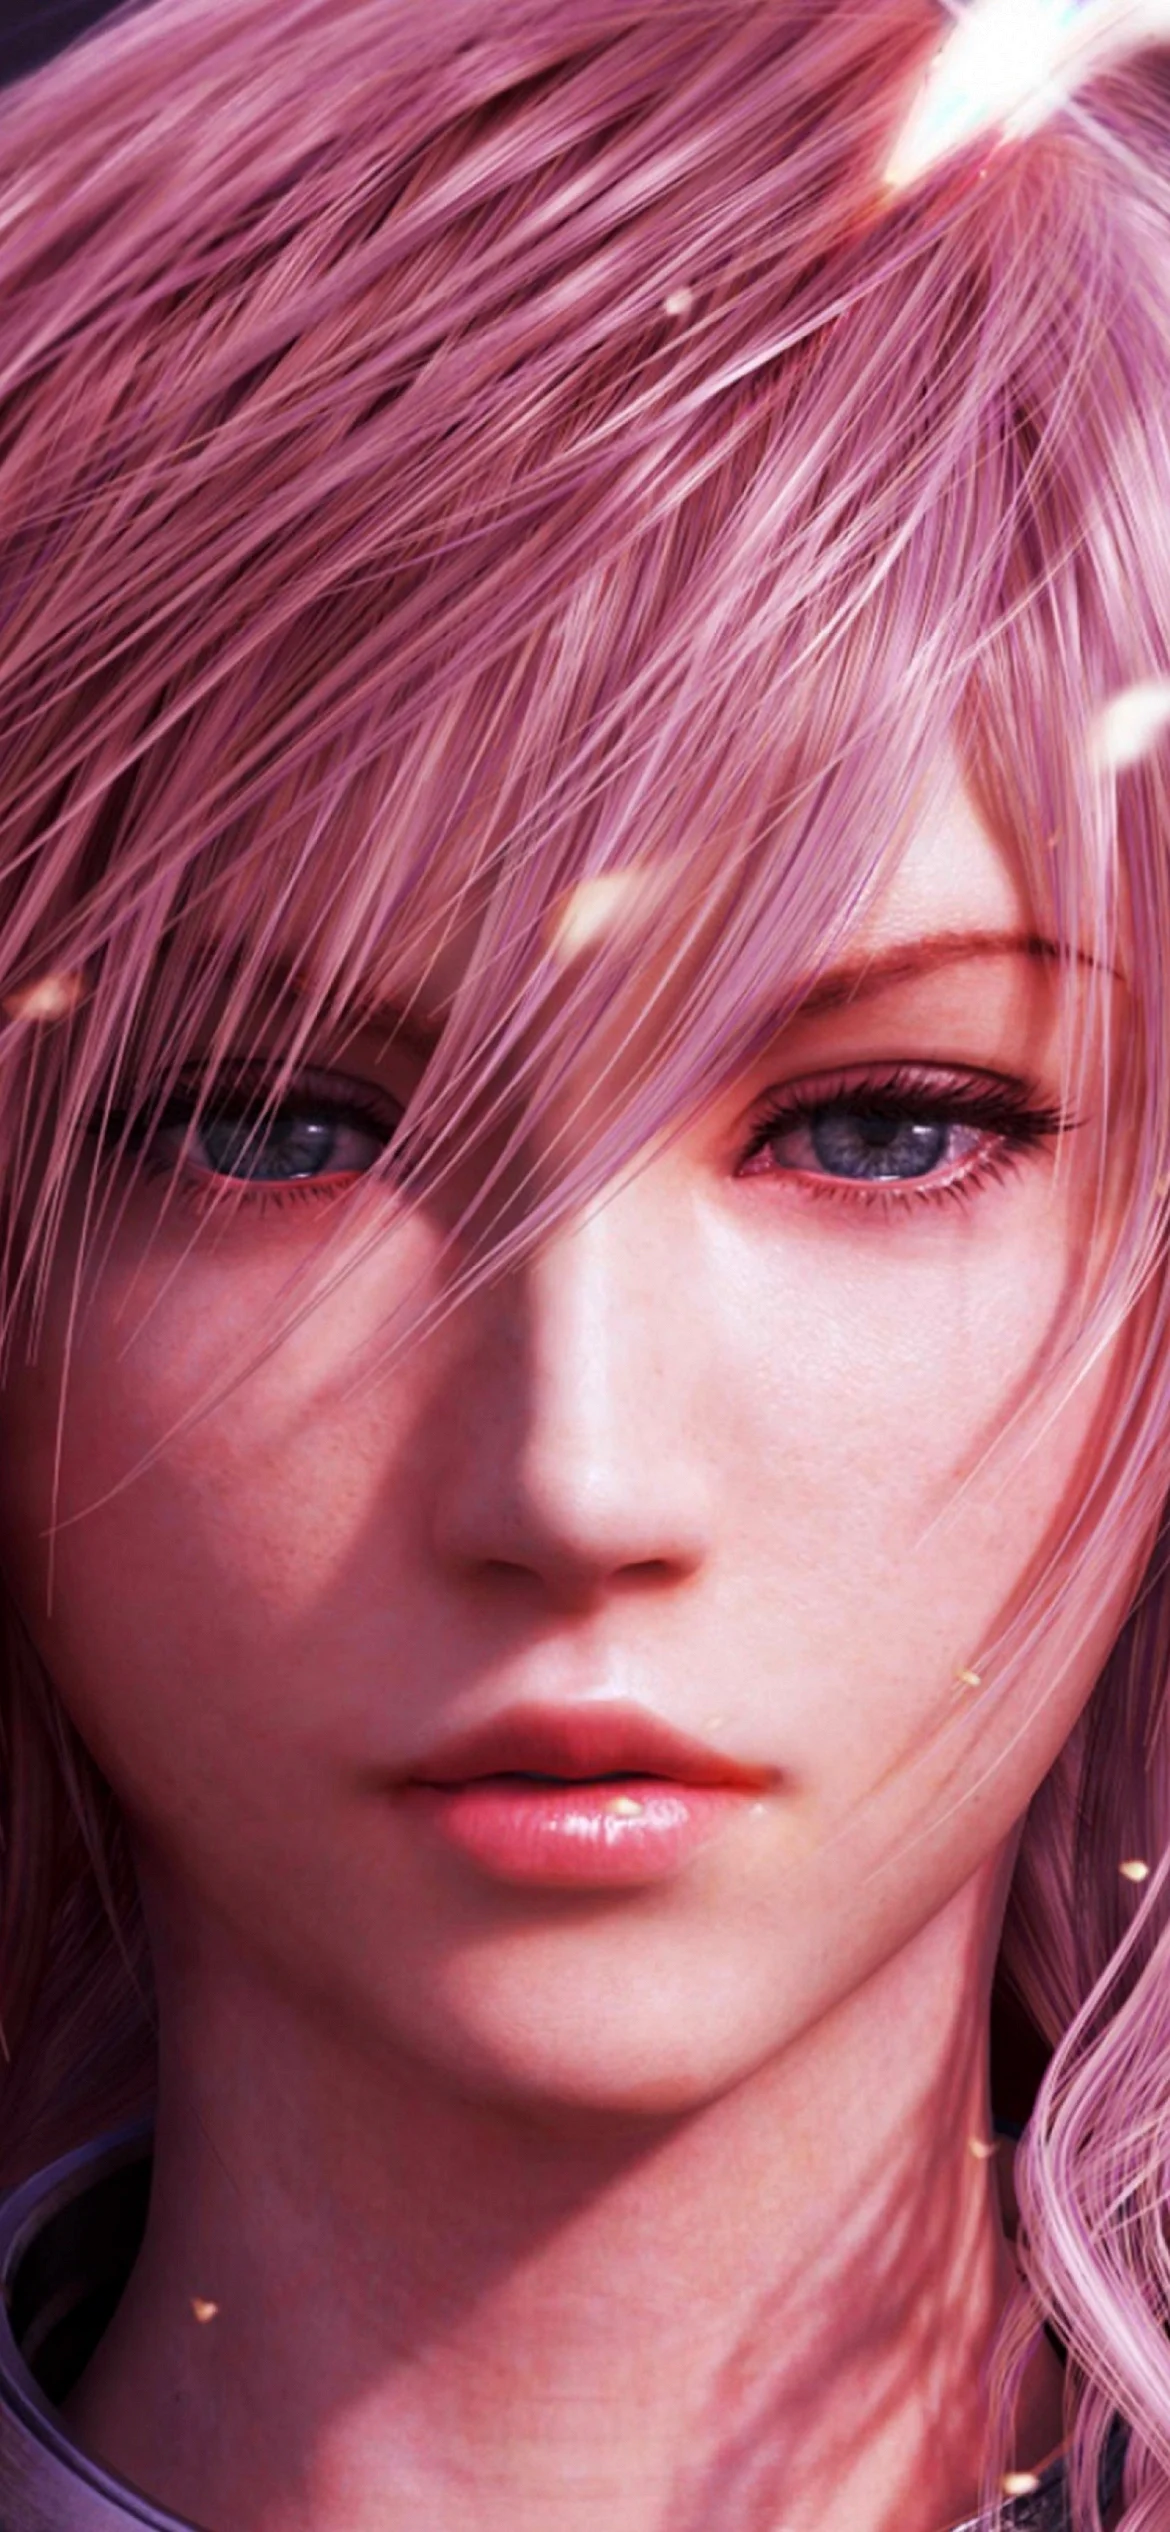 Final Fantasy Wallpaper for iPhone 12